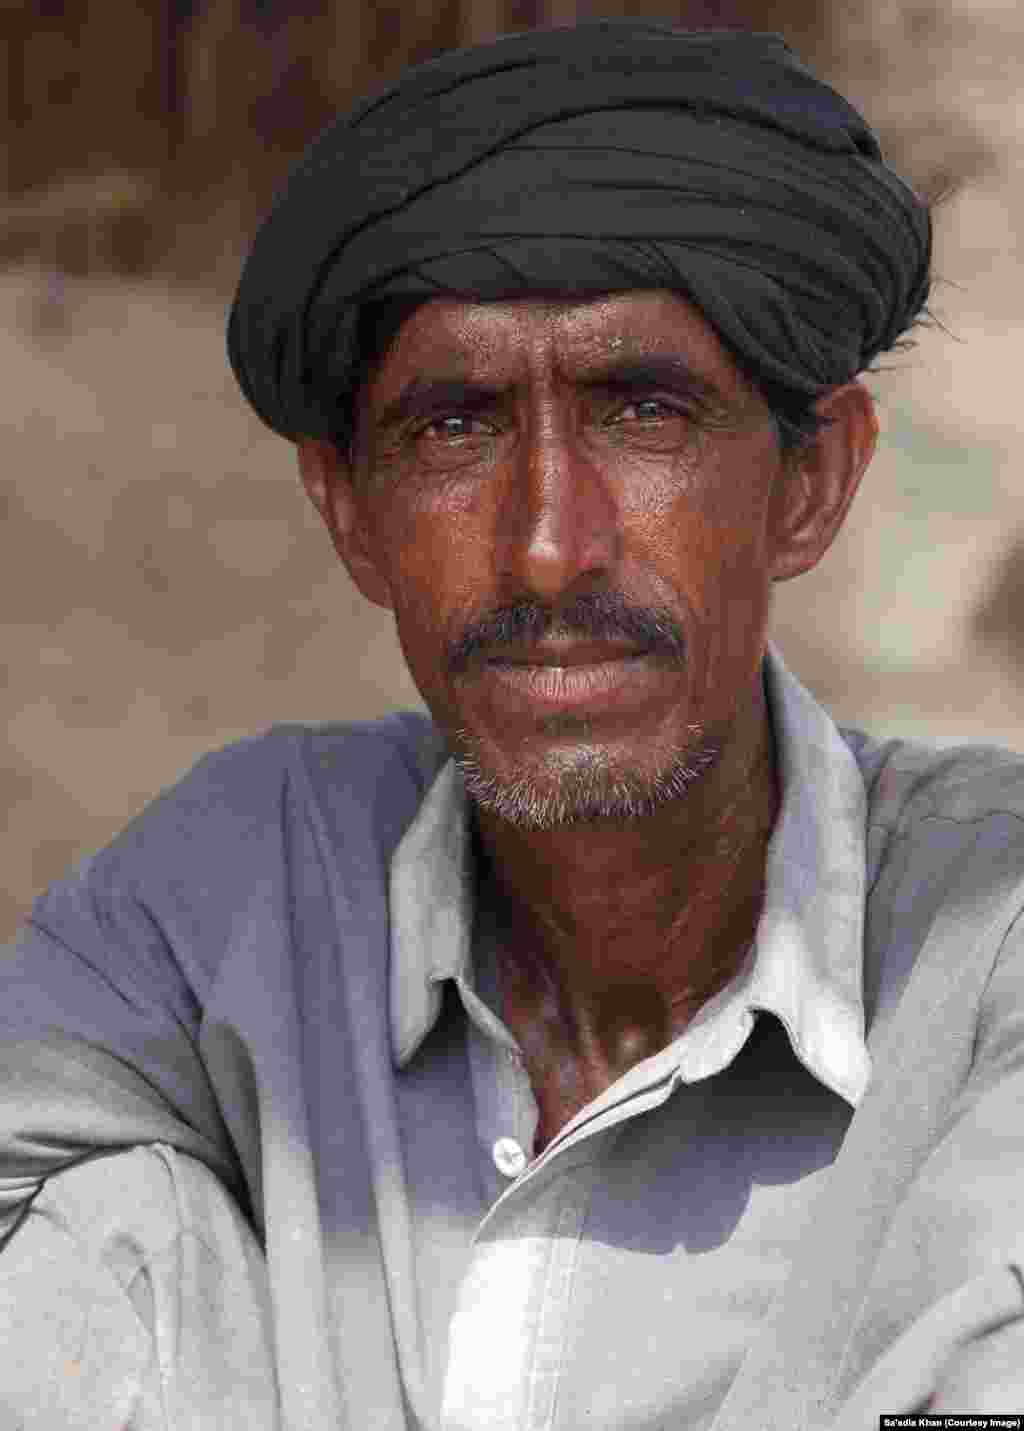 Ijaz-Ullah is a resident of Mianwali. Every year, he takes time out from farming to work on the date plantations.